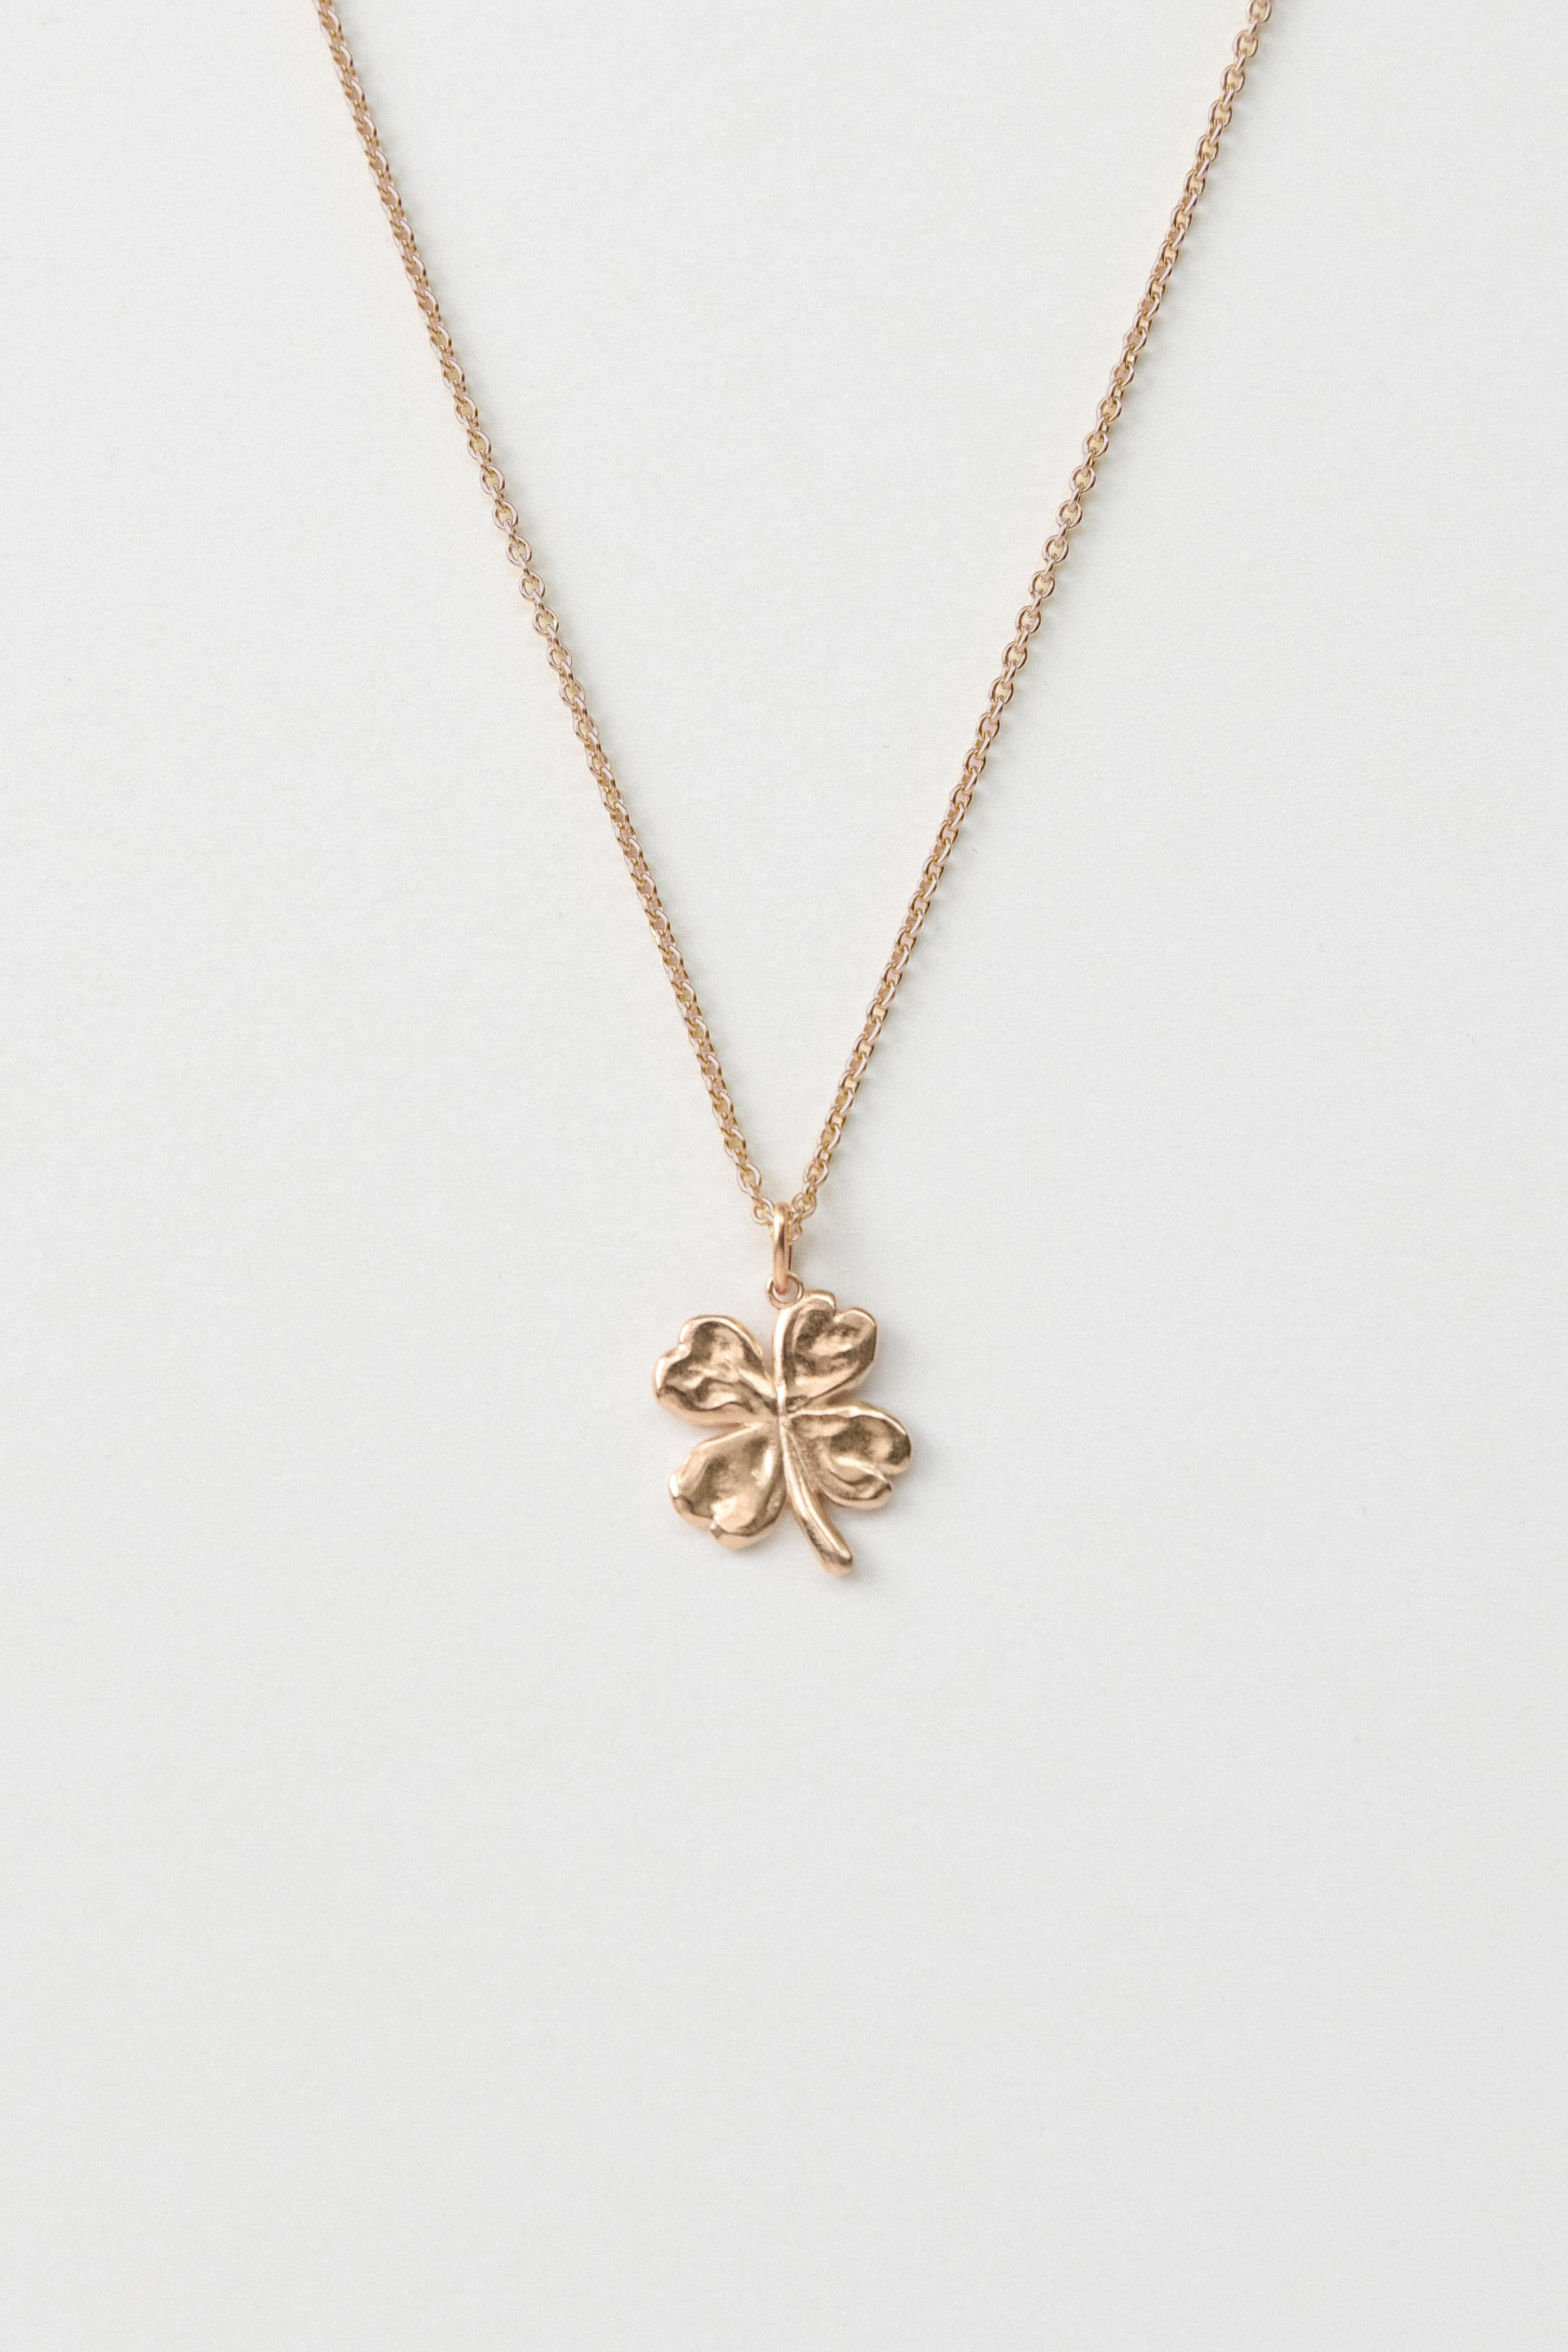 AIDA x Hypend Lucky Clover Necklace Gold Plated